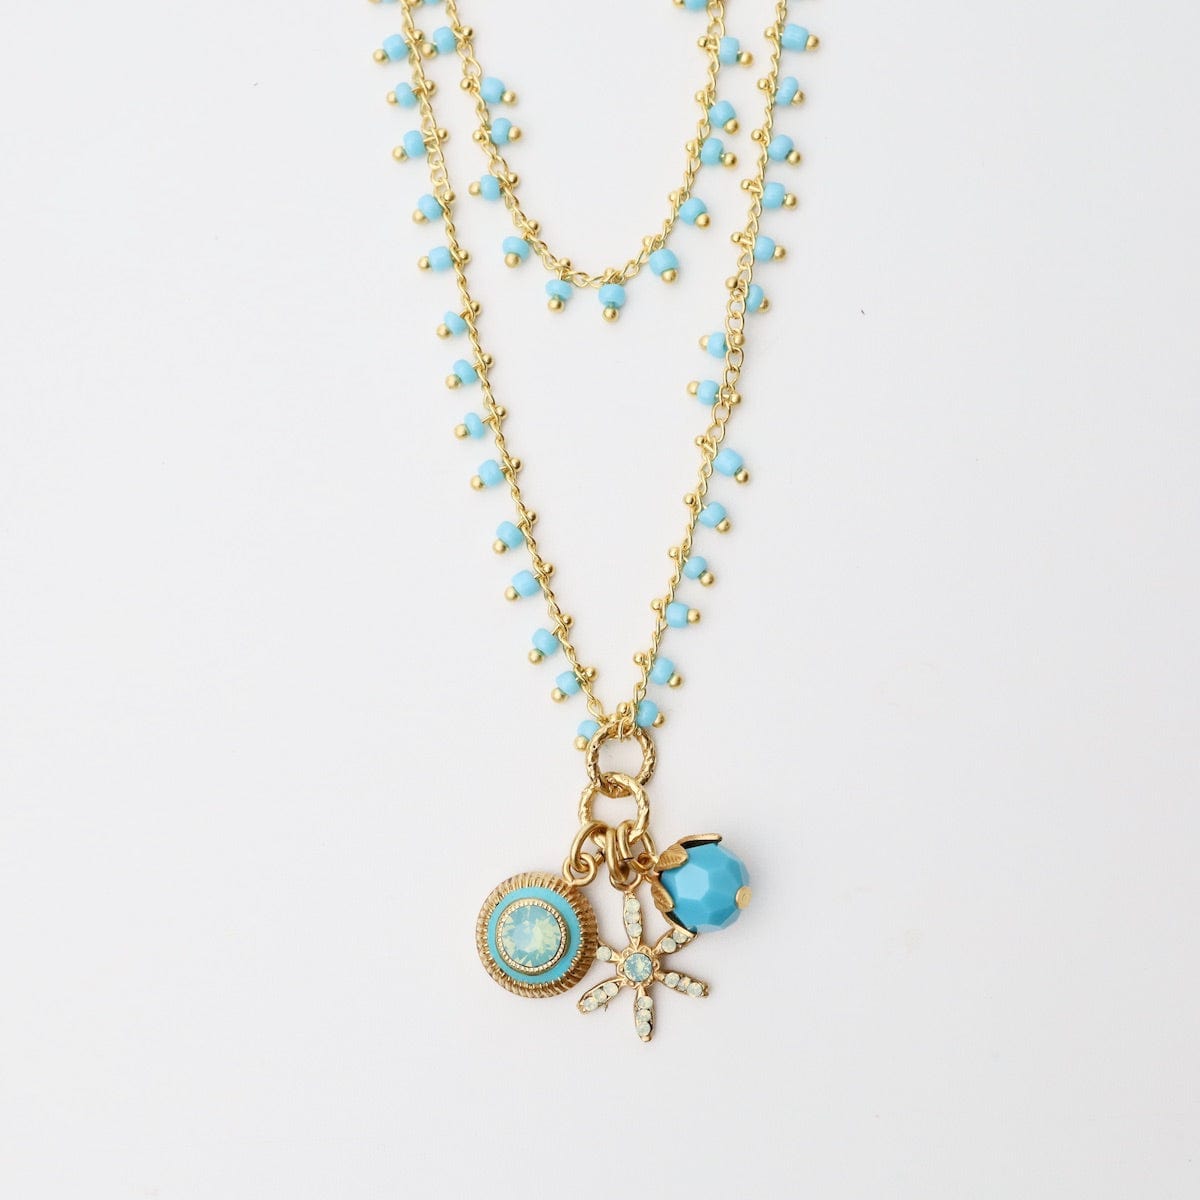 NKL-JM Leighton Necklace - Turquoise